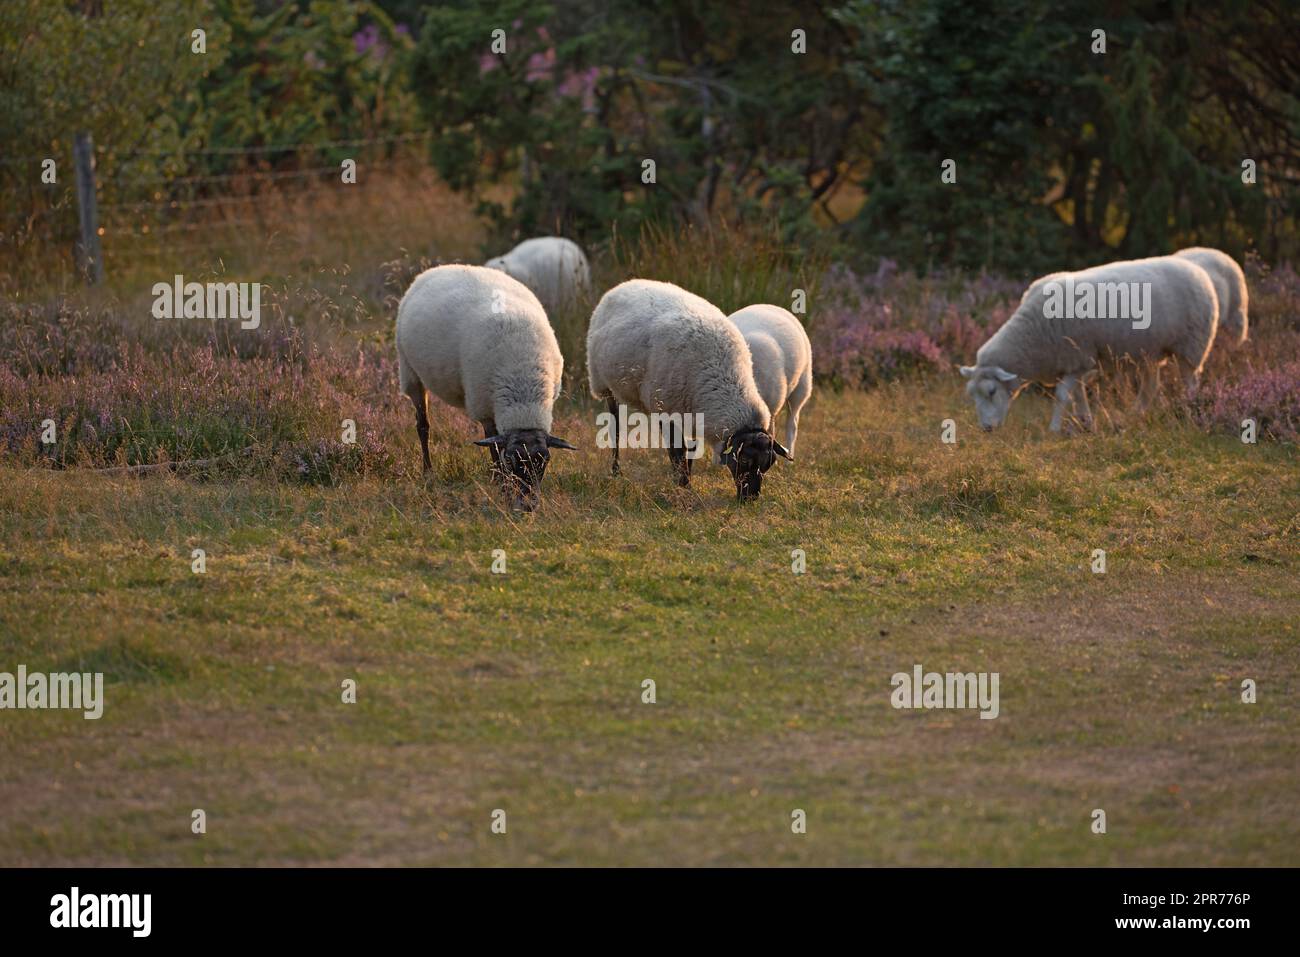 Sheep grazing in a heather meadow during sunset in Rebild National Park, Denmark. A flock of woolly lambs walking and eating grass on a blooming field or a pastoral land on a farm. Free range mutton Stock Photo